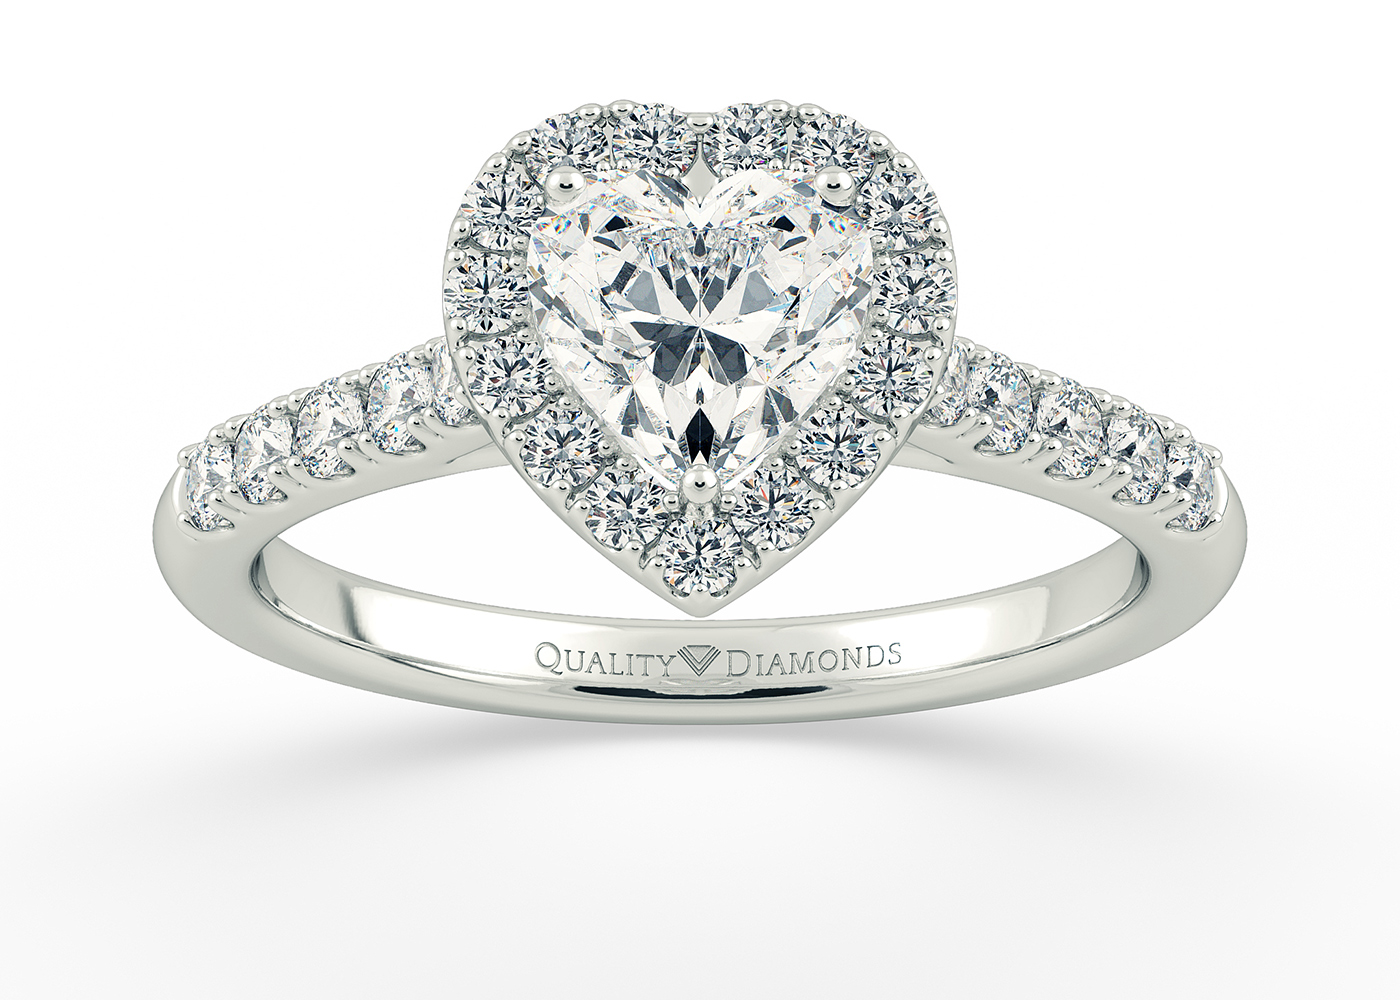 Two Carat Halo Heart Diamond Ring in 18K White Gold